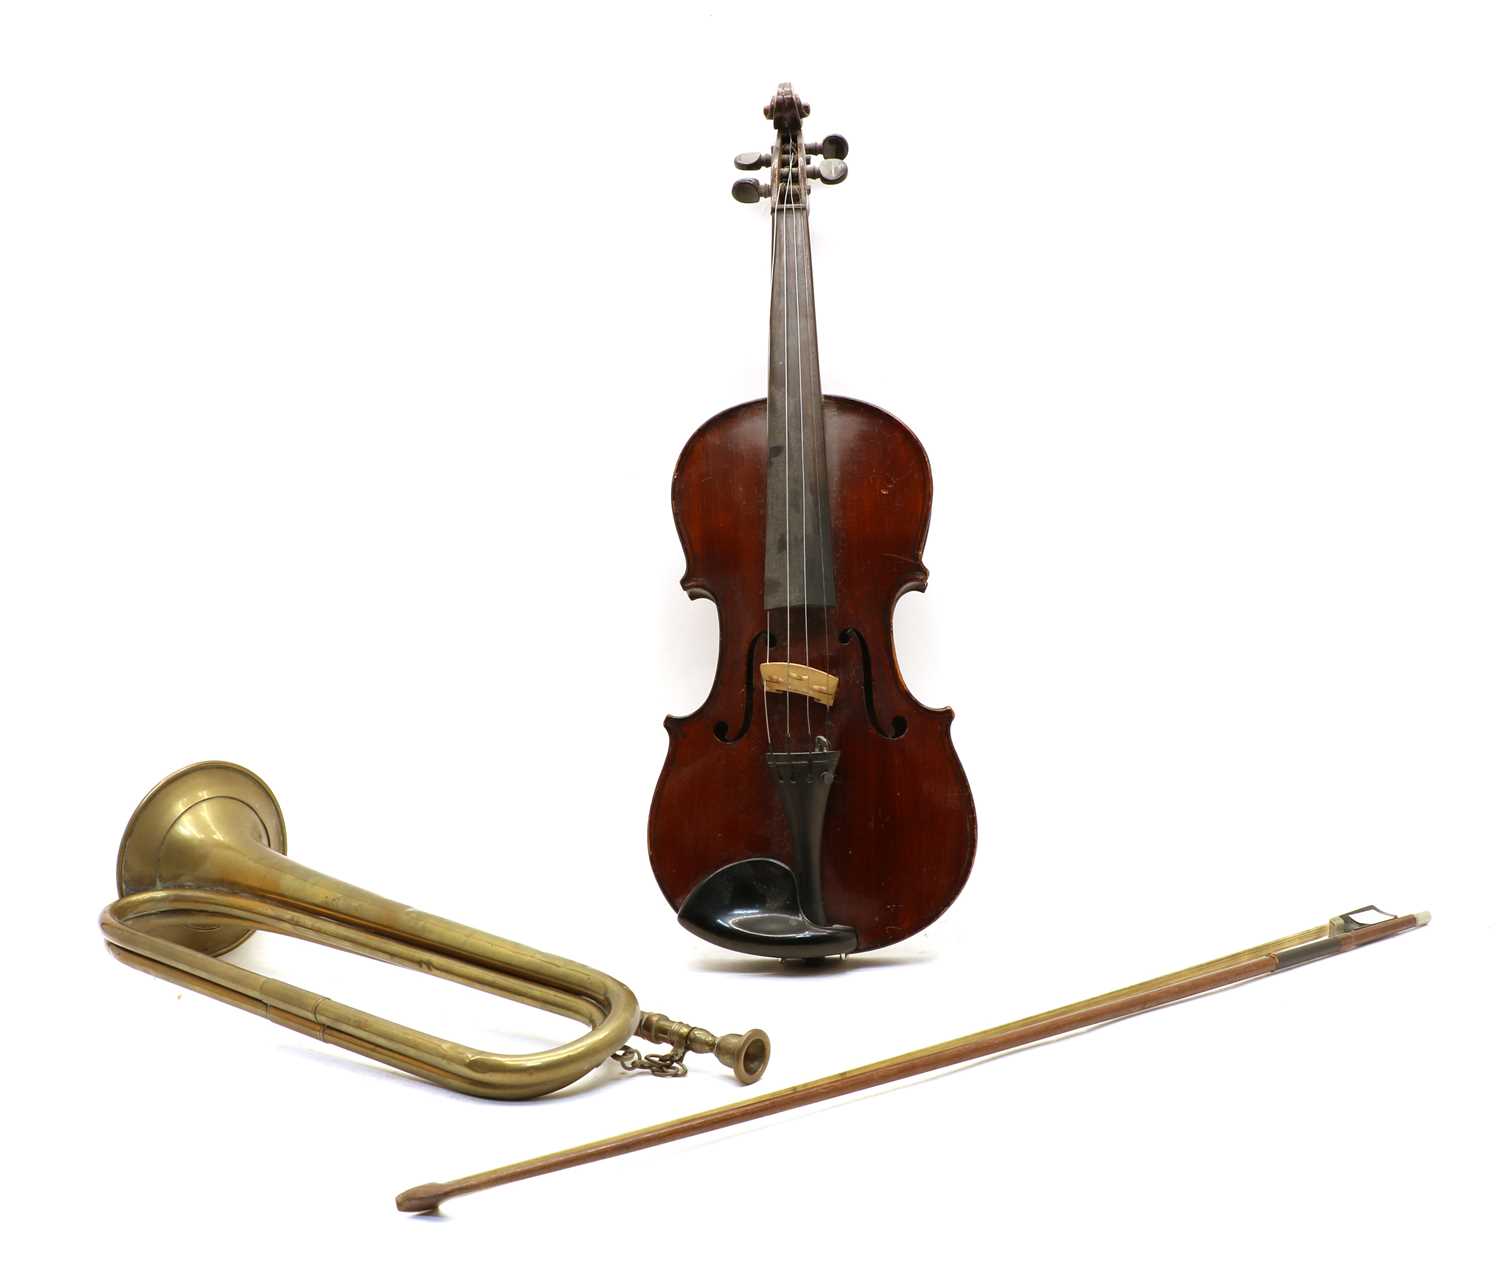 Lot 85 - The Maidstone vintage violin and bow